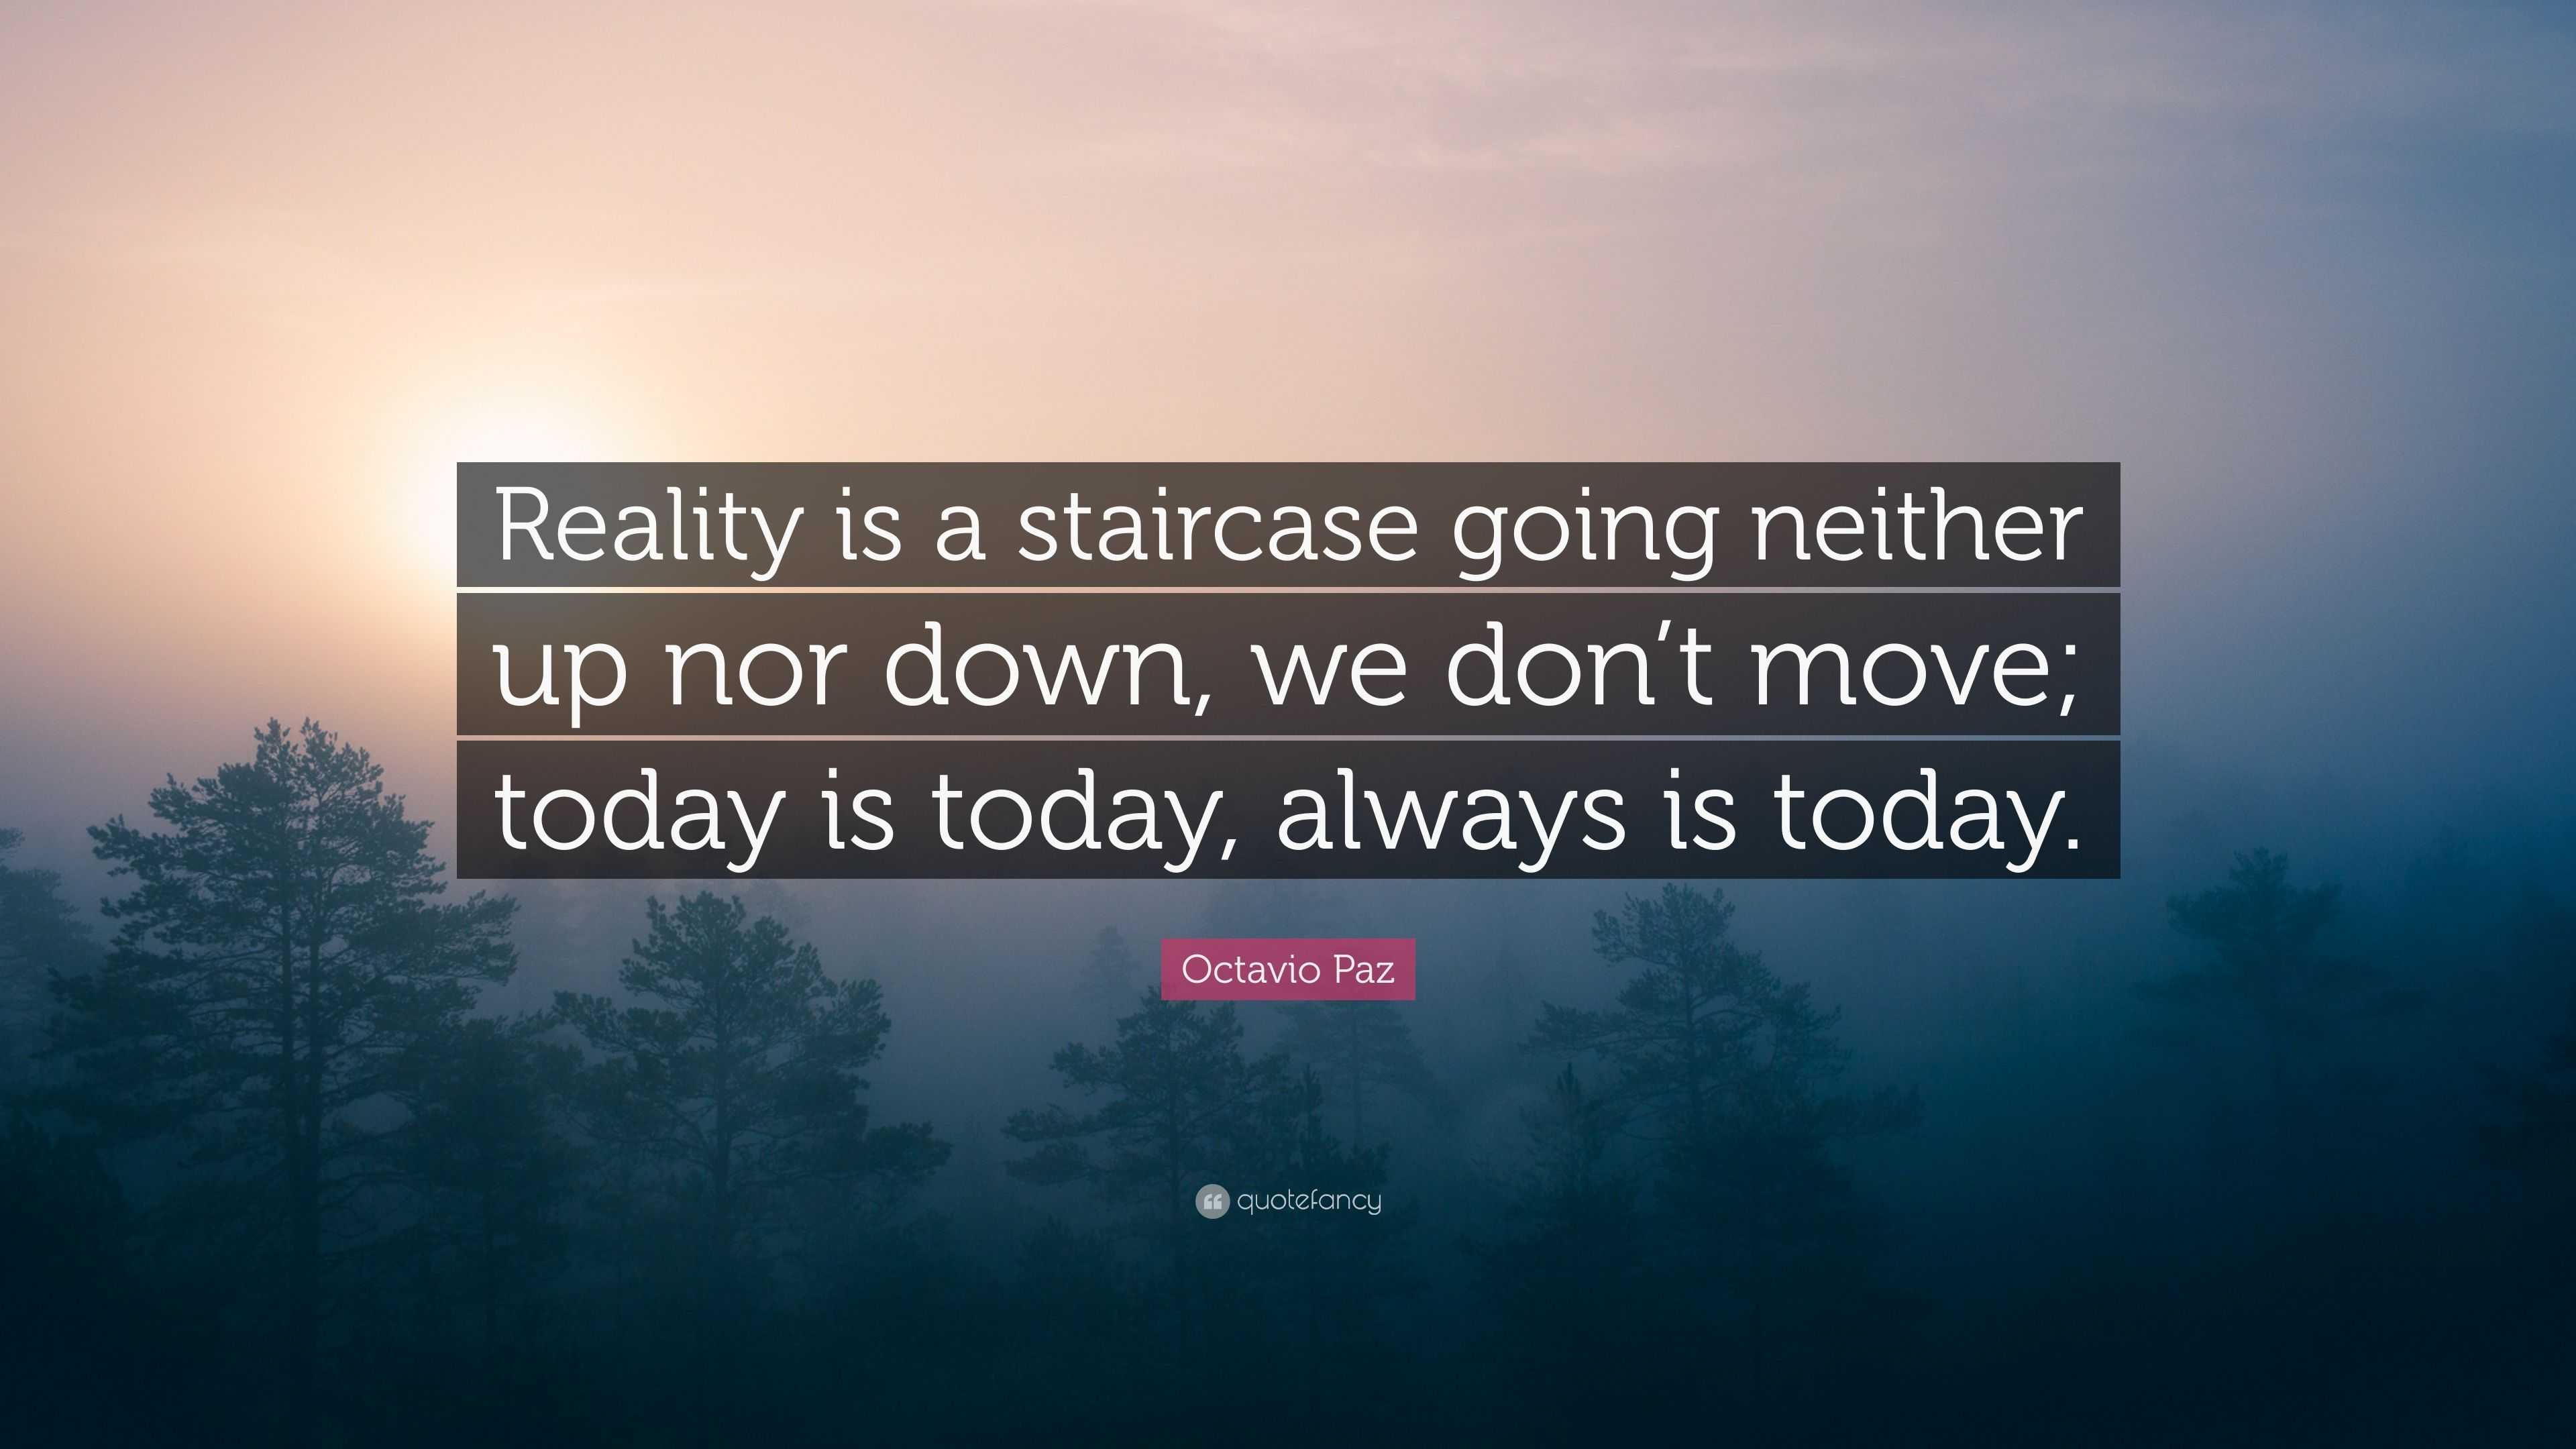 Octavio Paz Quote: “Reality is a staircase going neither up nor down ...